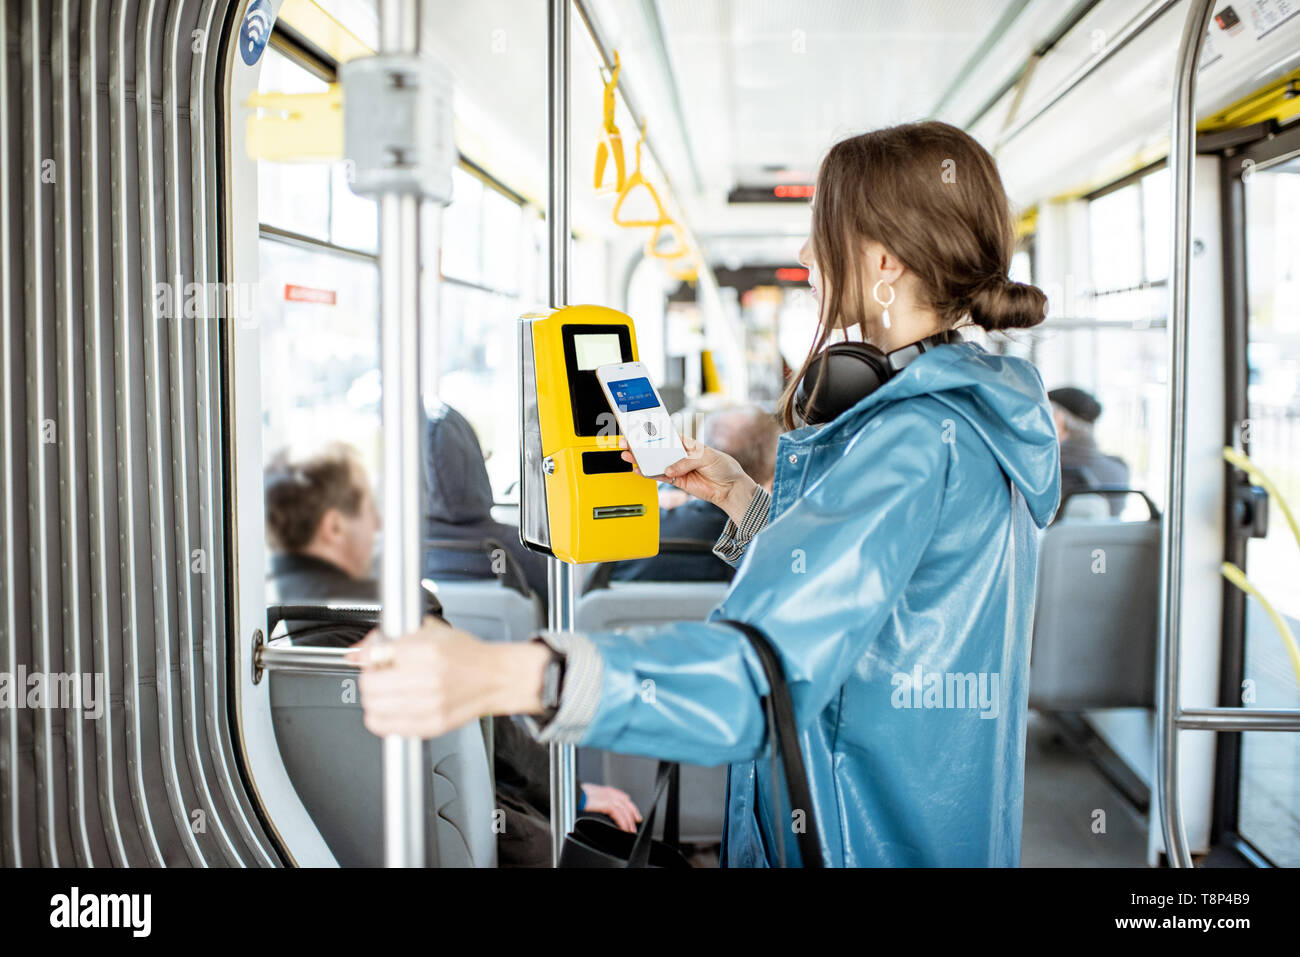 Woman paying conctactless with smartphone for the public transport in the tram Stock Photo